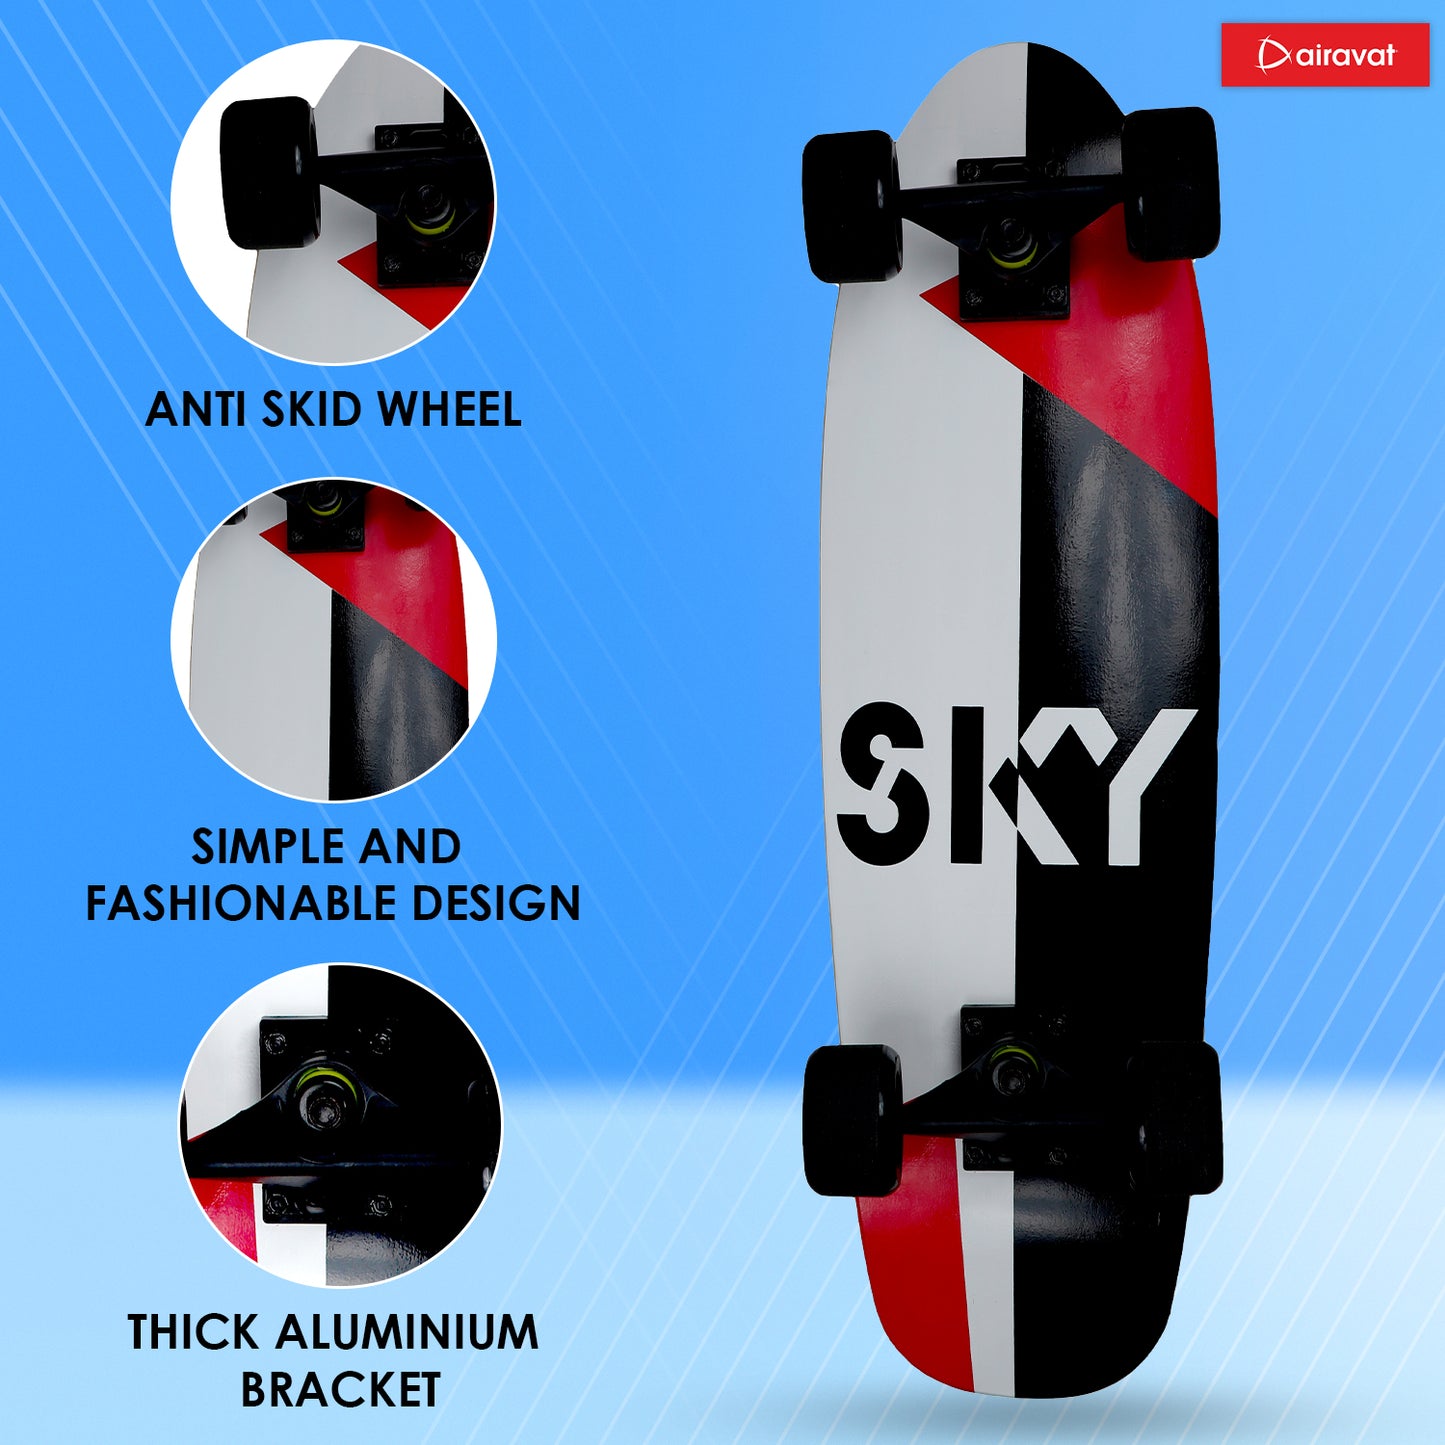 7815-skateboard-style6-Features